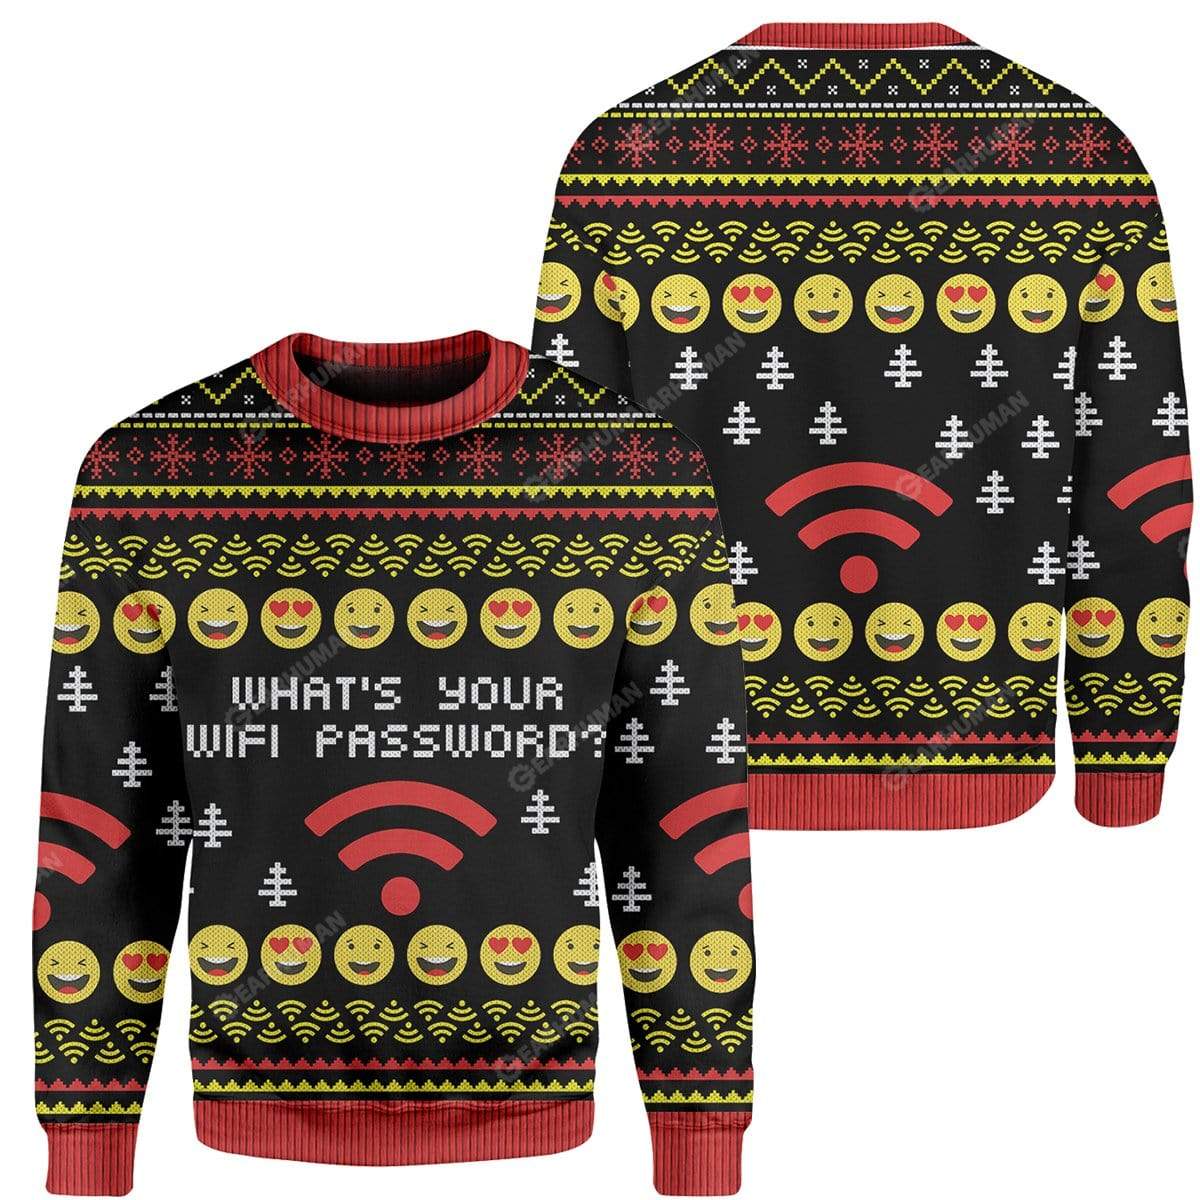 Ugly What's Your Wifi Password Custom Sweater Apparel HD-TA21111920 Ugly Christmas Sweater 